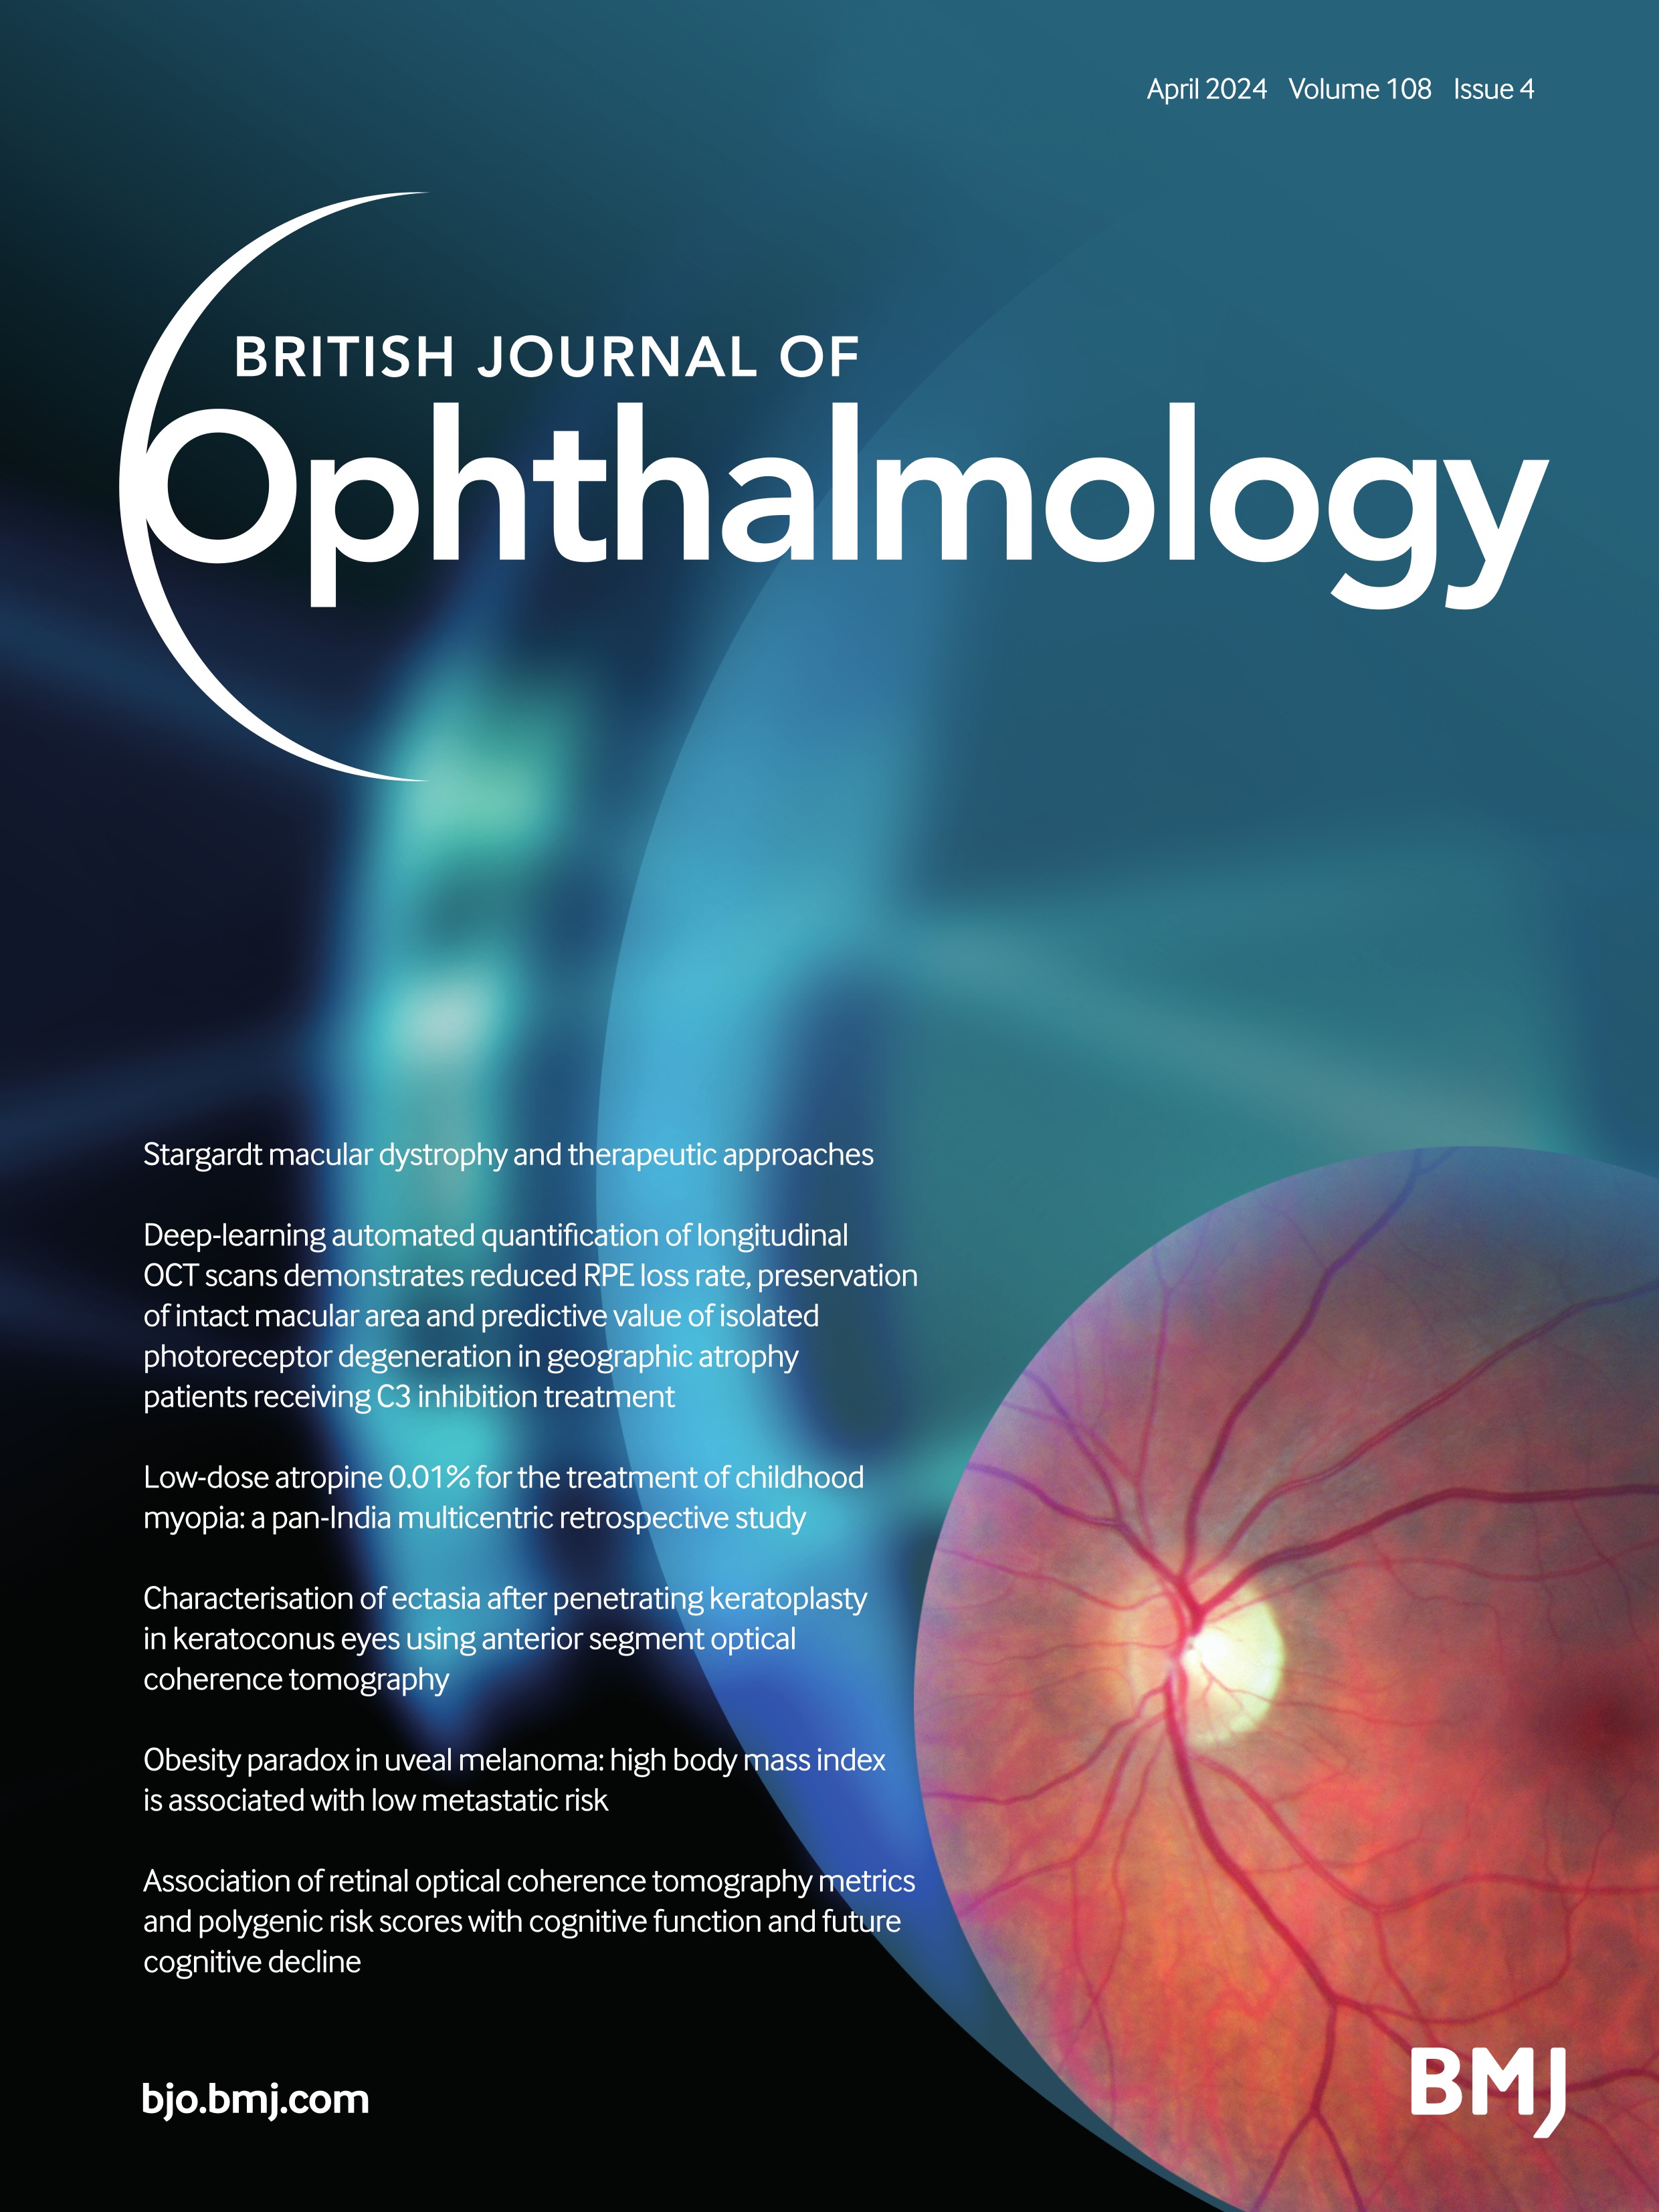 Determinants of non-attendance at face-to-face and telemedicine ophthalmic consultations